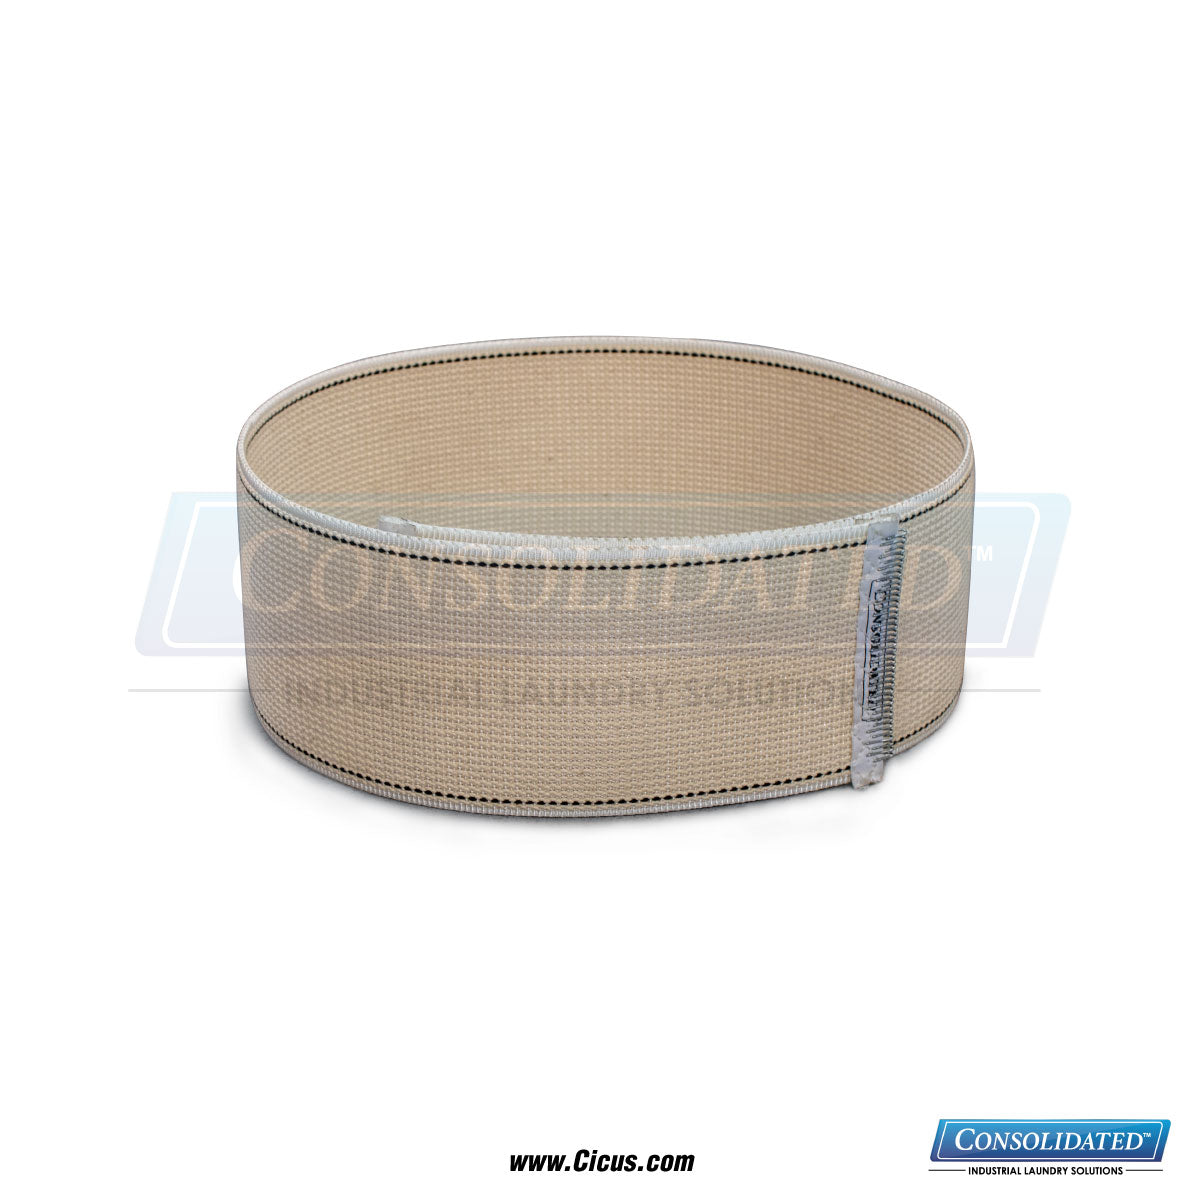 CIC Exclusive Chicago Dryer Canvas Ribbon - 1" x 83" (1001-103)